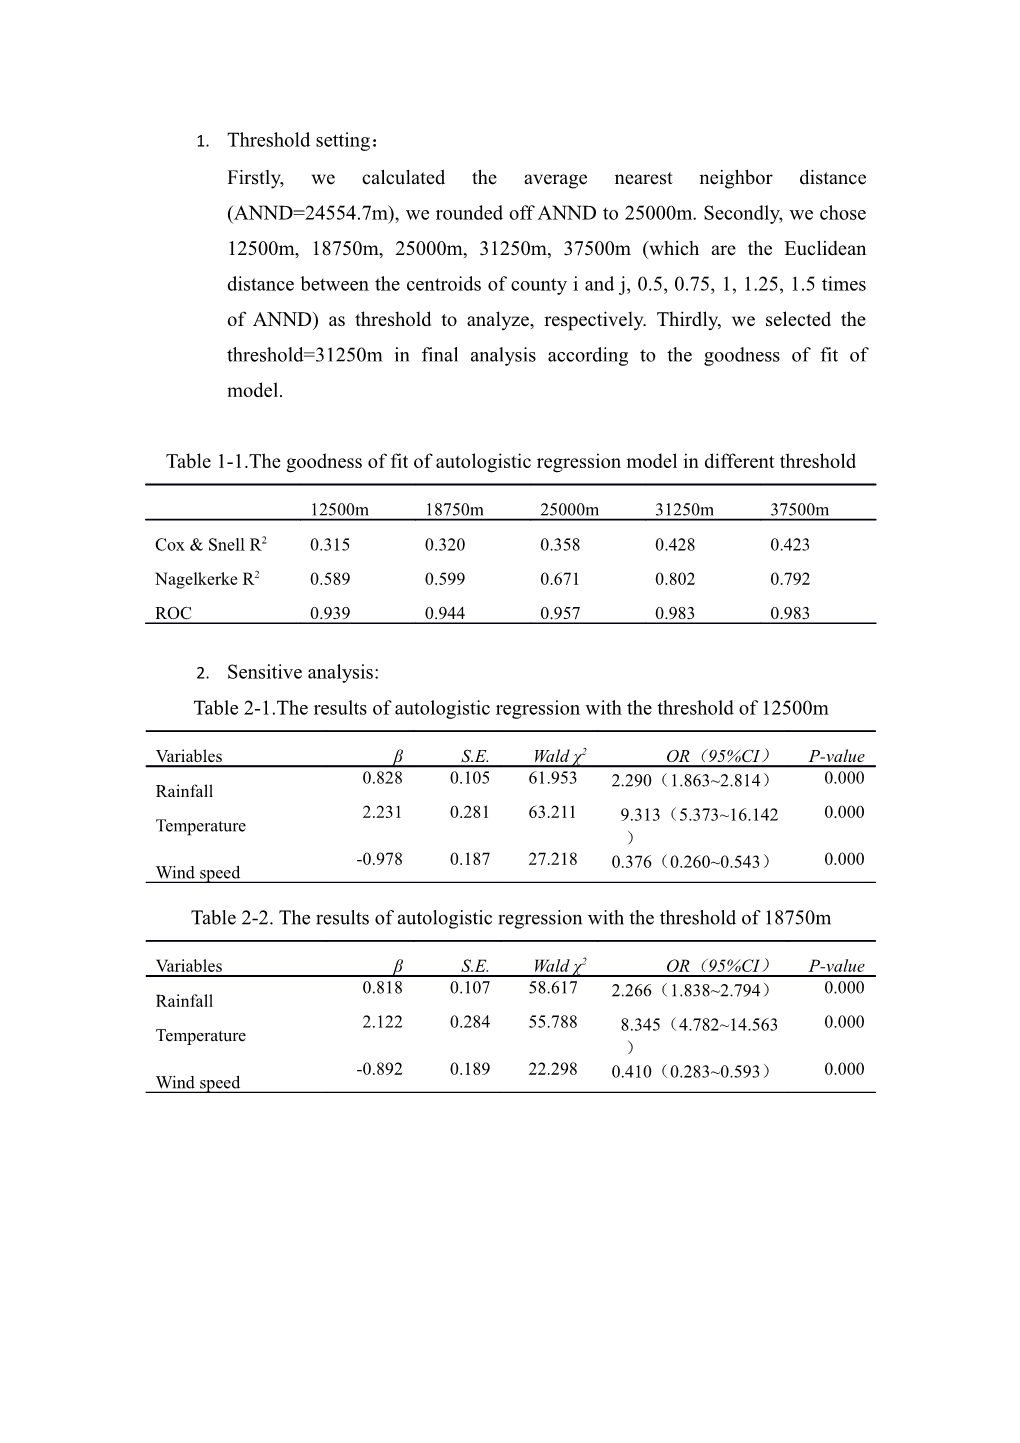 Table 1-1.The Goodness of Fit of Autologistic Regression Model in Different Threshold